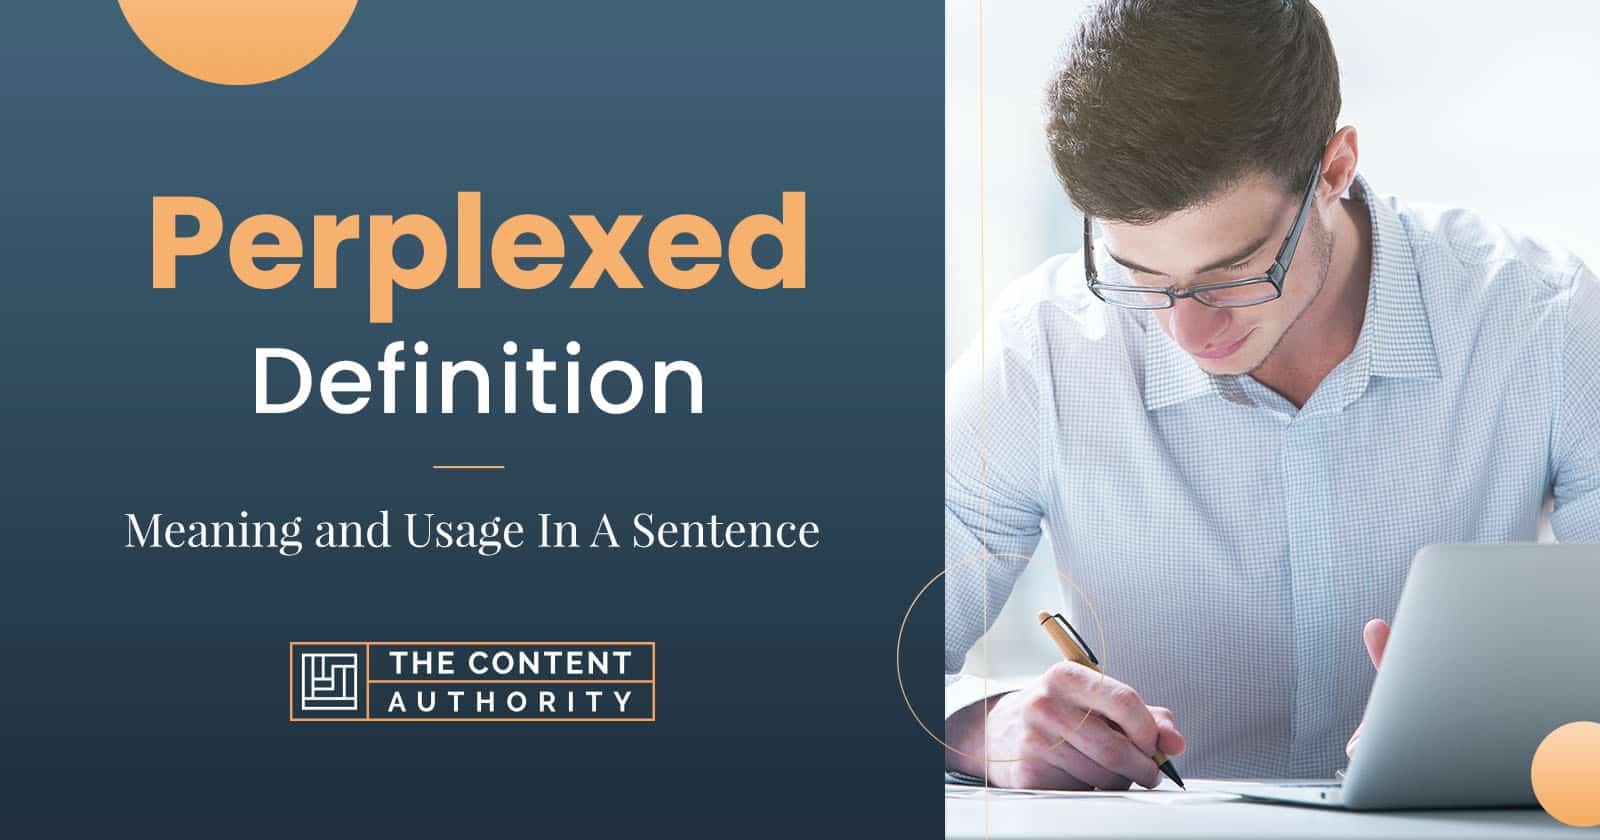 Perplexed Definition – Meaning and Usage In A Sentence